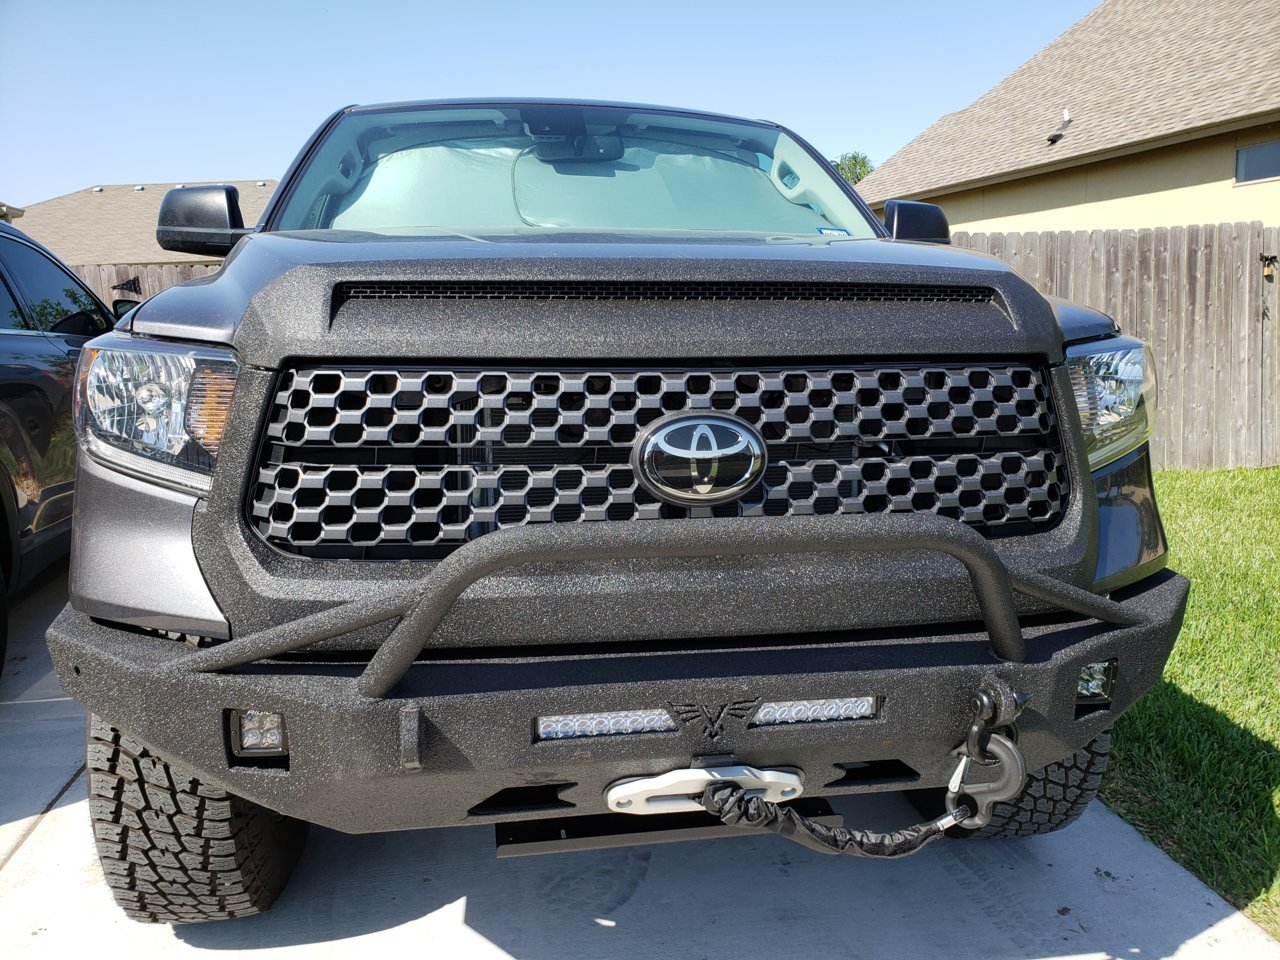 Help, I stripped my Bumper bolts and flange nuts | Toyota Tundra Forum